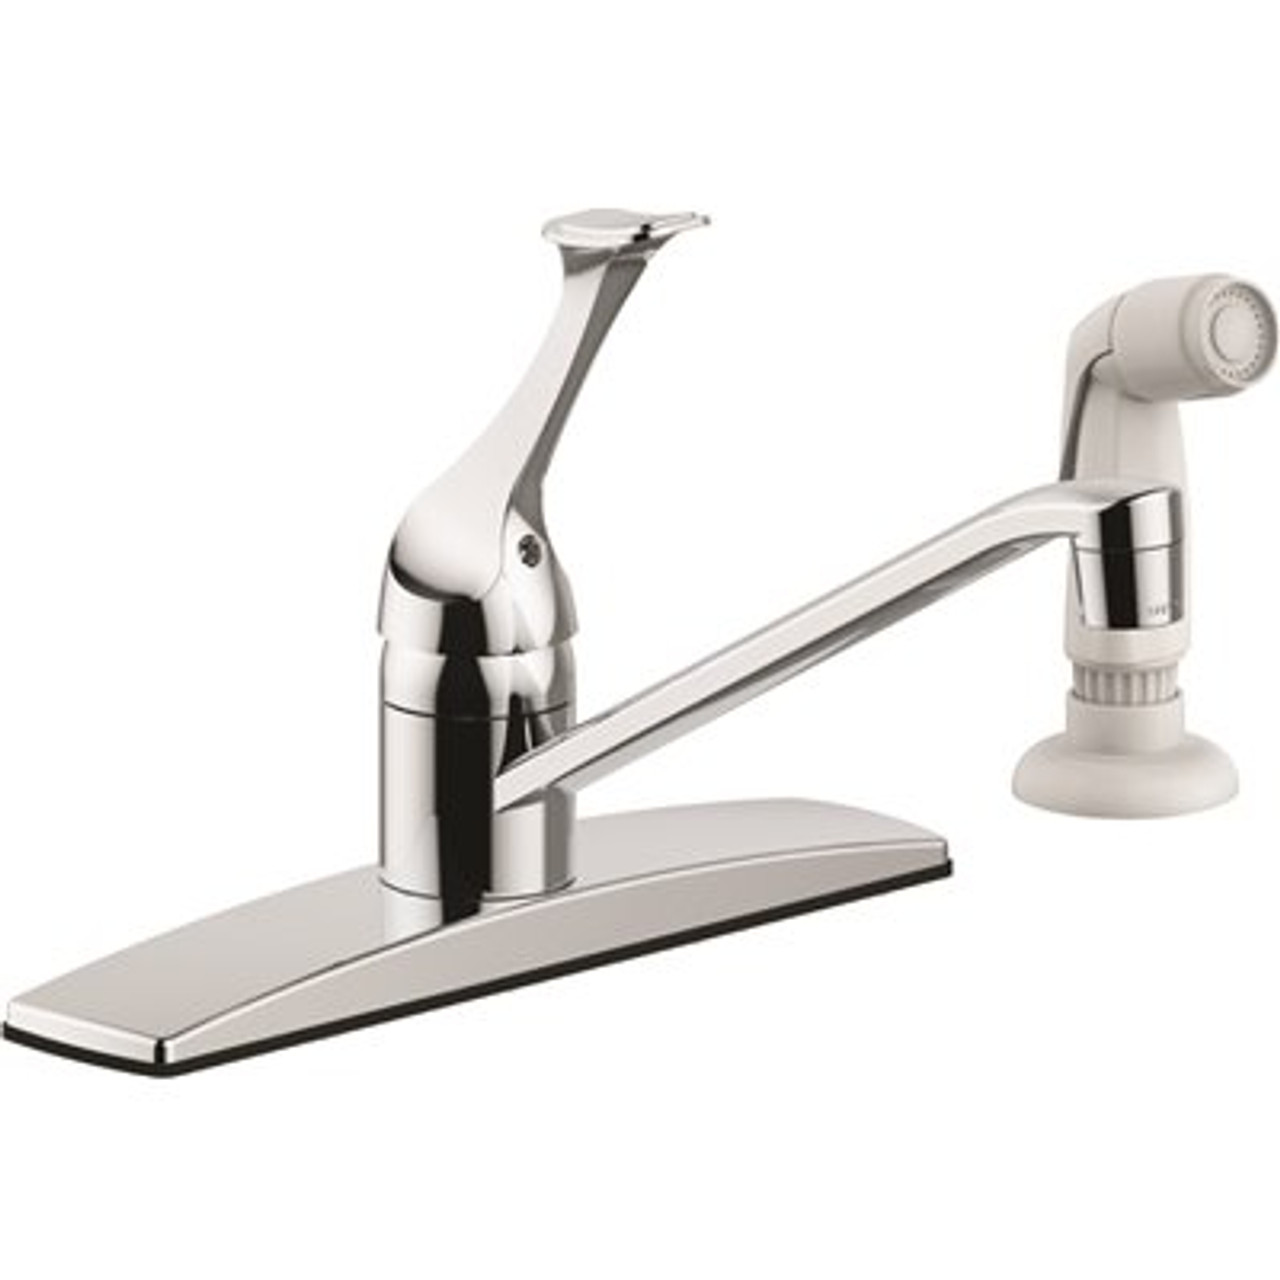 PRIVATE BRAND UNBRANDED Single-Handle Standard Kitchen Faucet in Chrome with White Side Sprayer